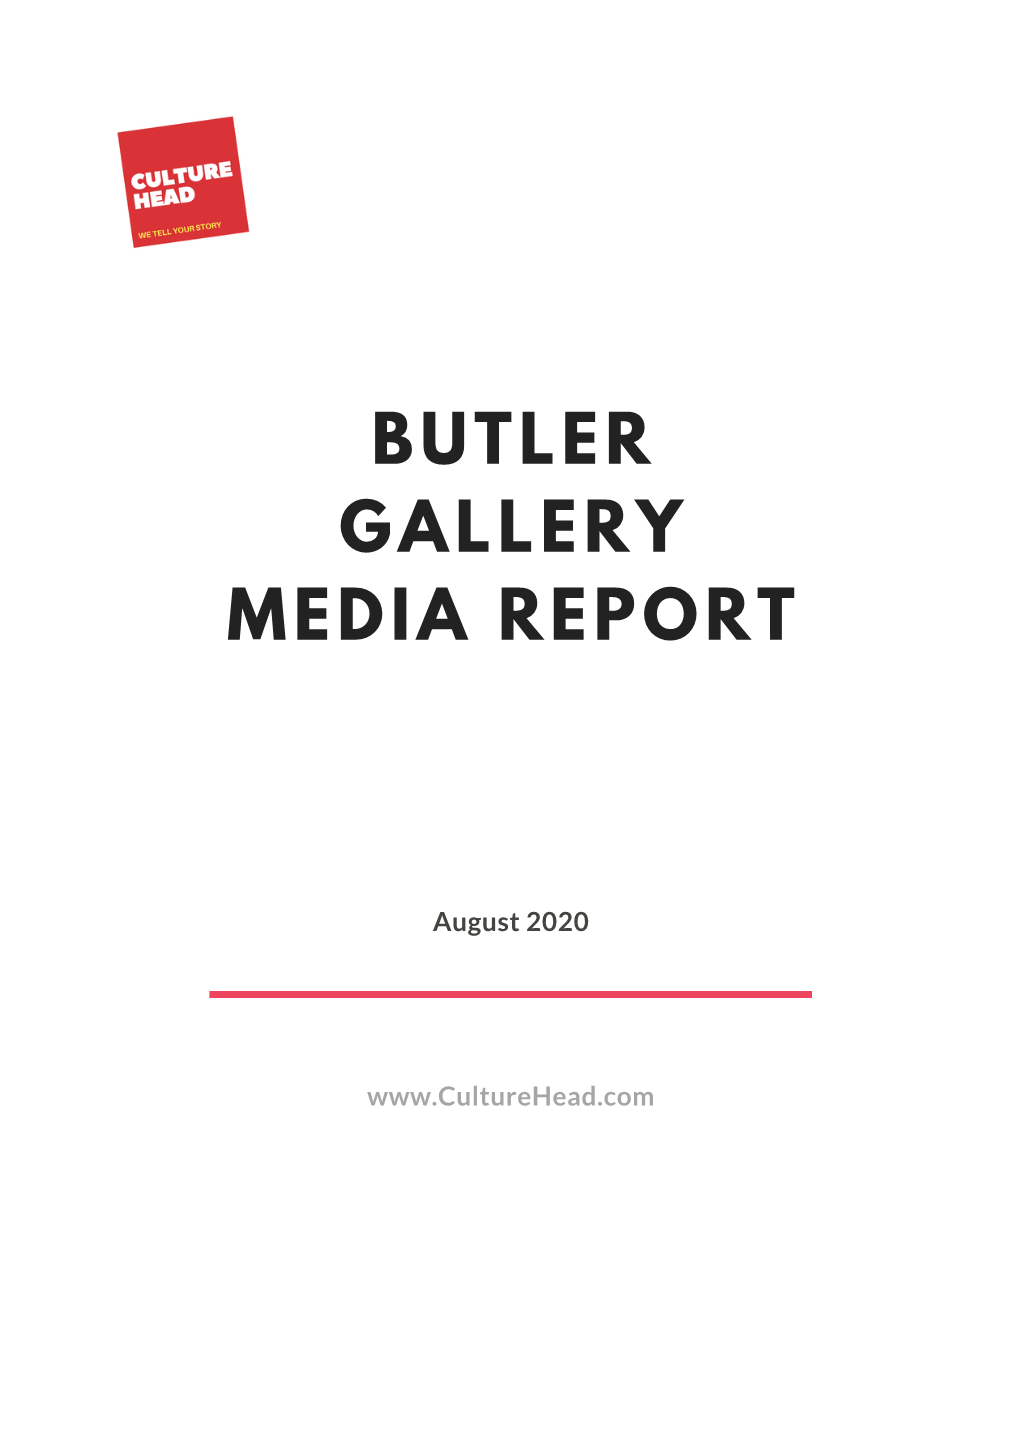 Butler Gallery in the News August 2020